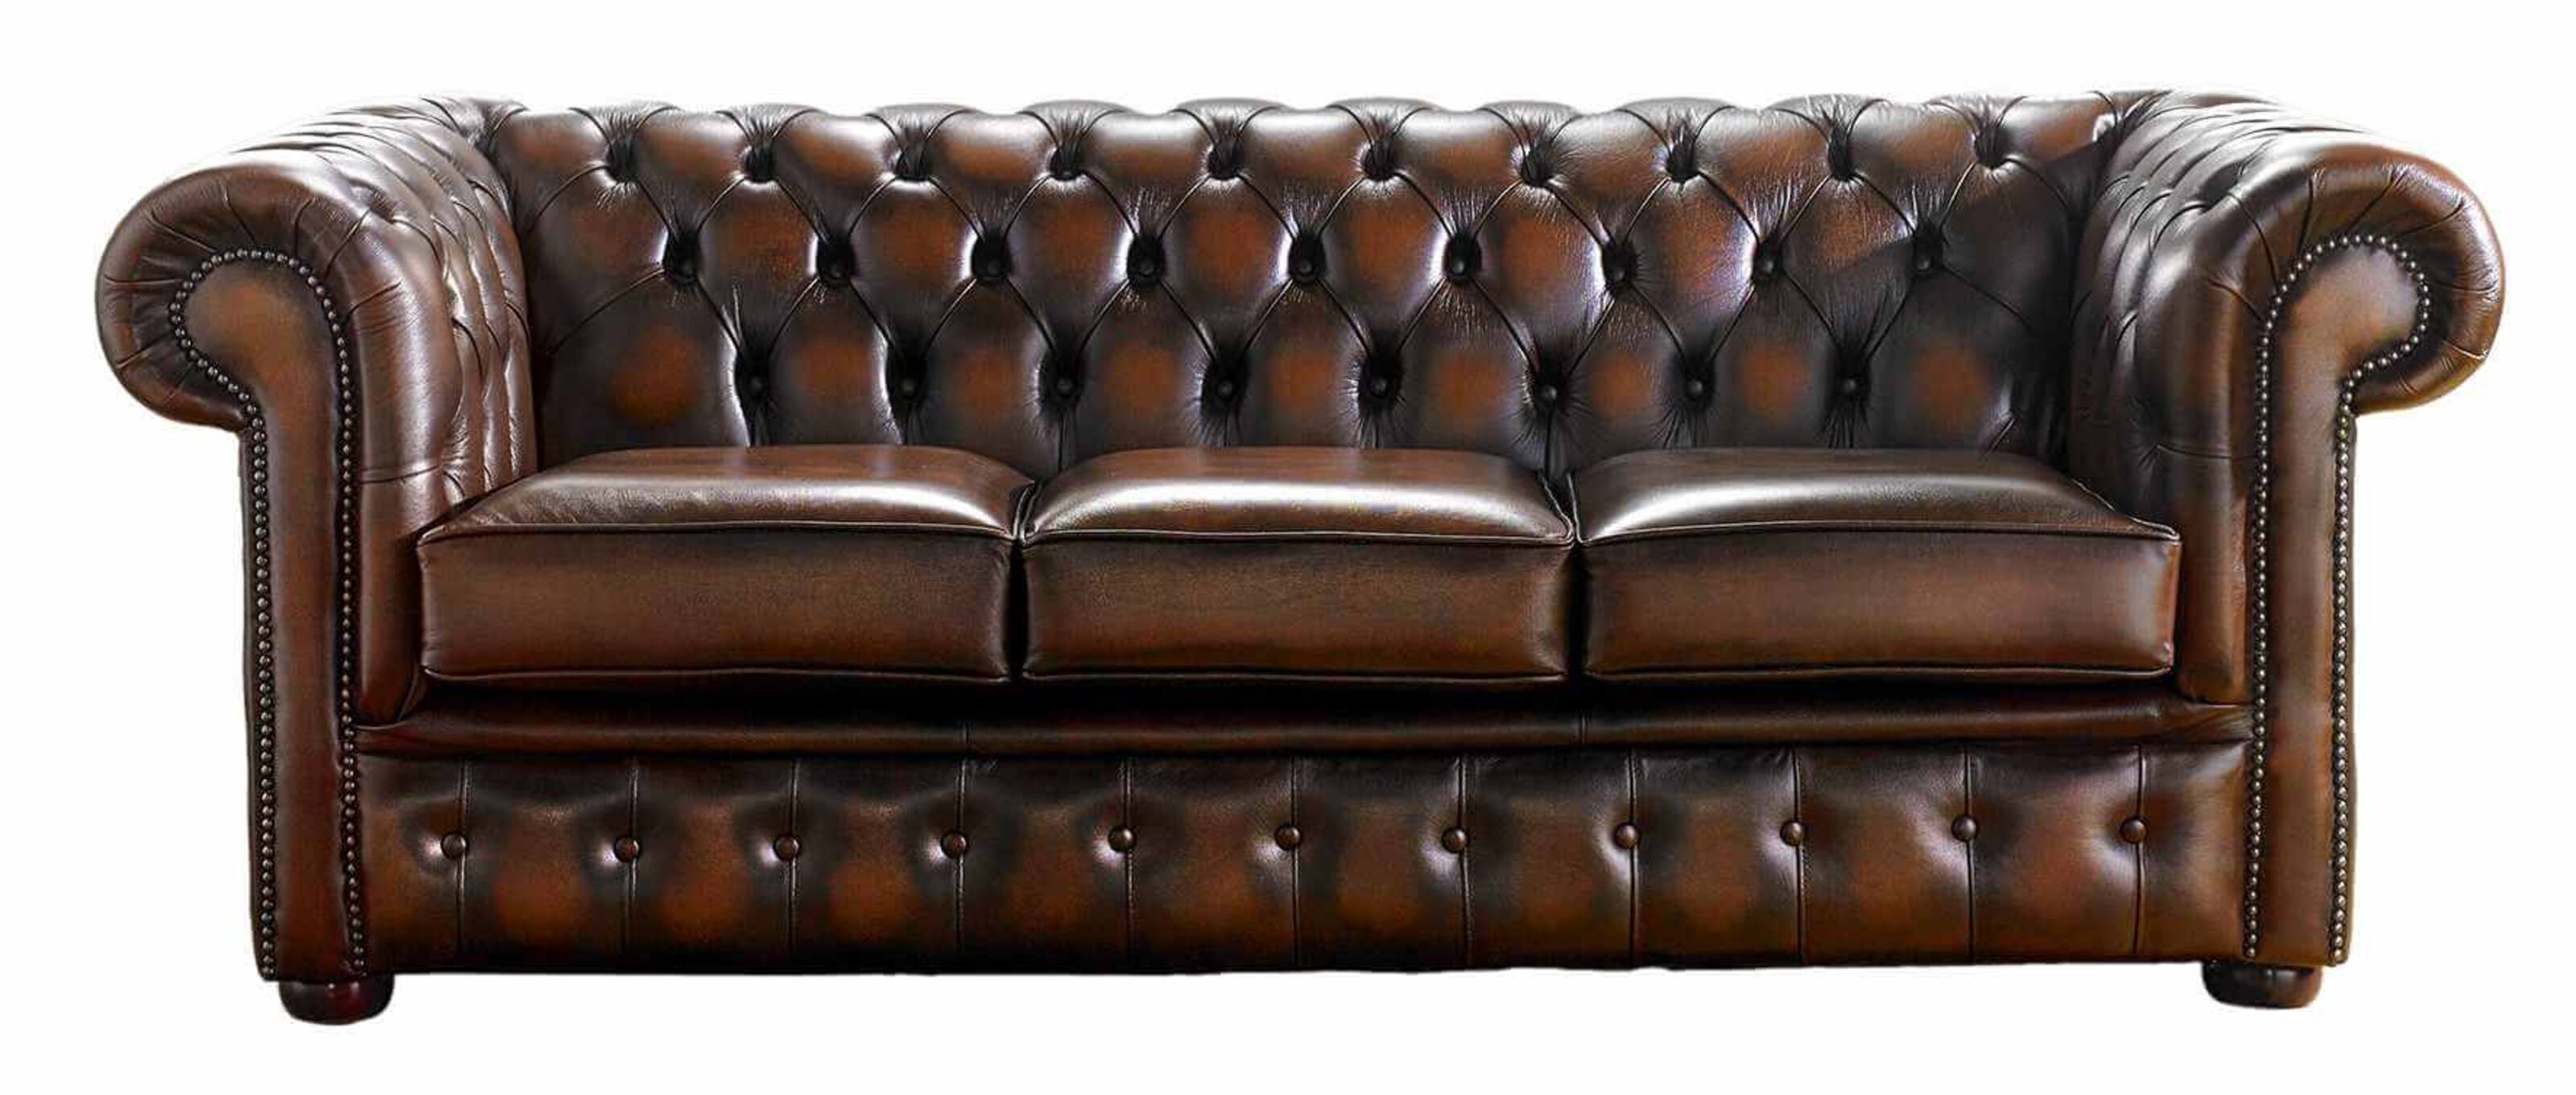 Timeless Sophistication: Leather Choices for Chesterfield Sofas  %Post Title